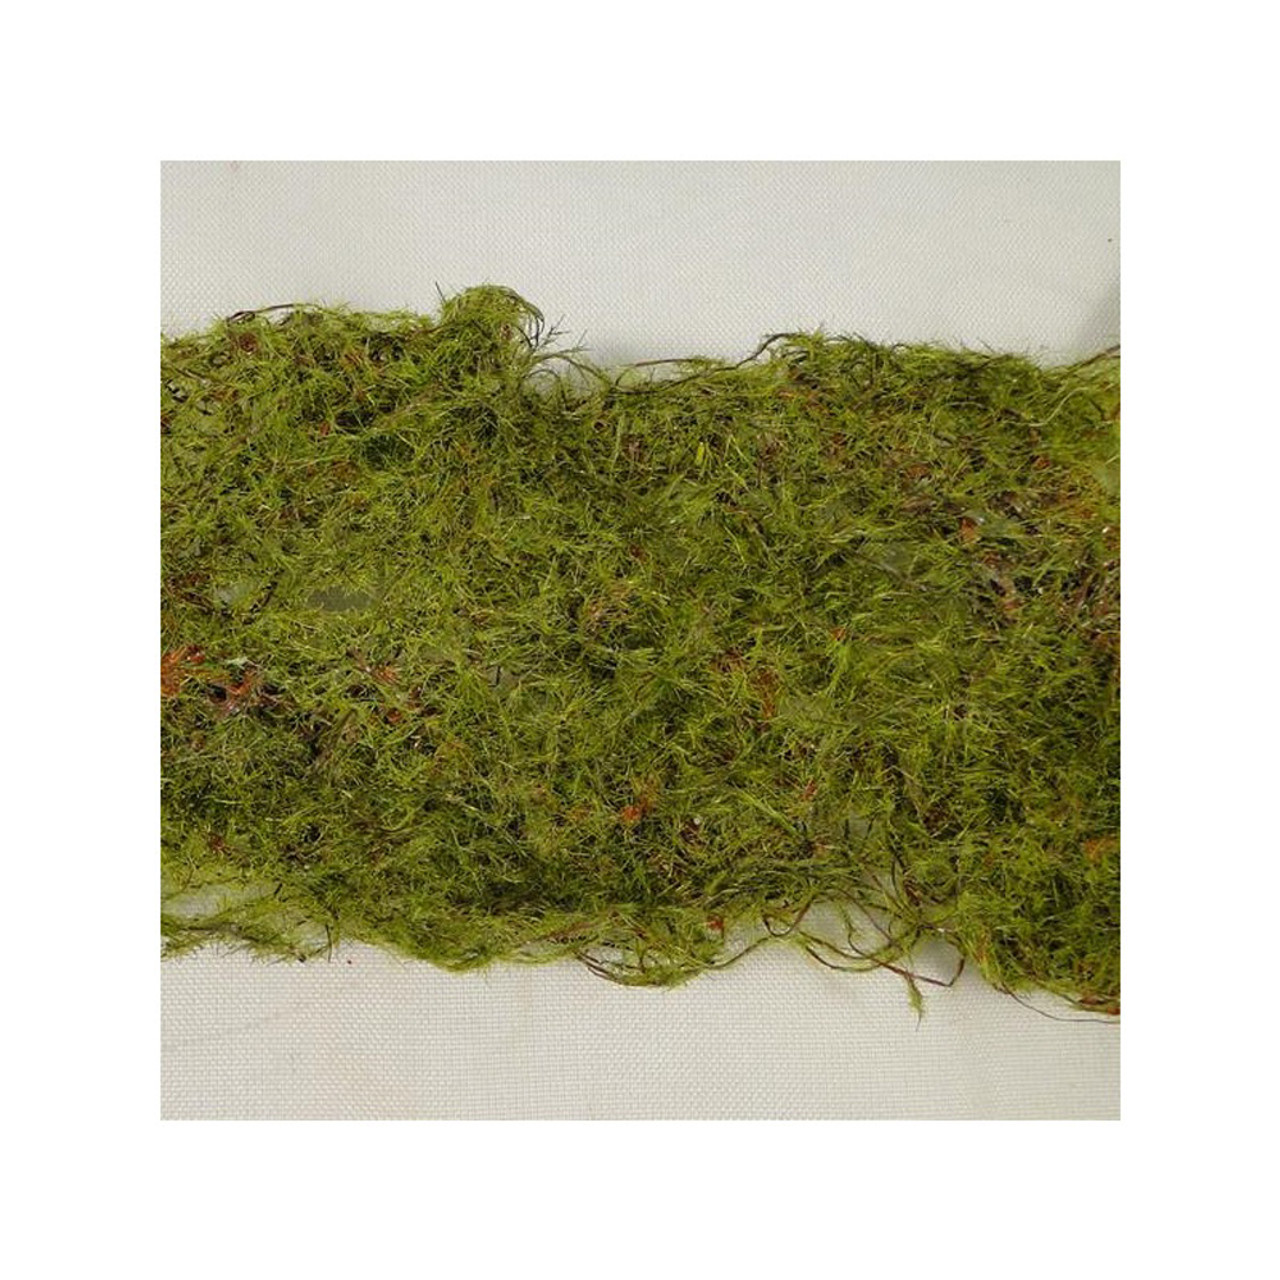 Artificial Moss Roll 6cm 2 5 Inches Wide X 90cm 35 Inches Long